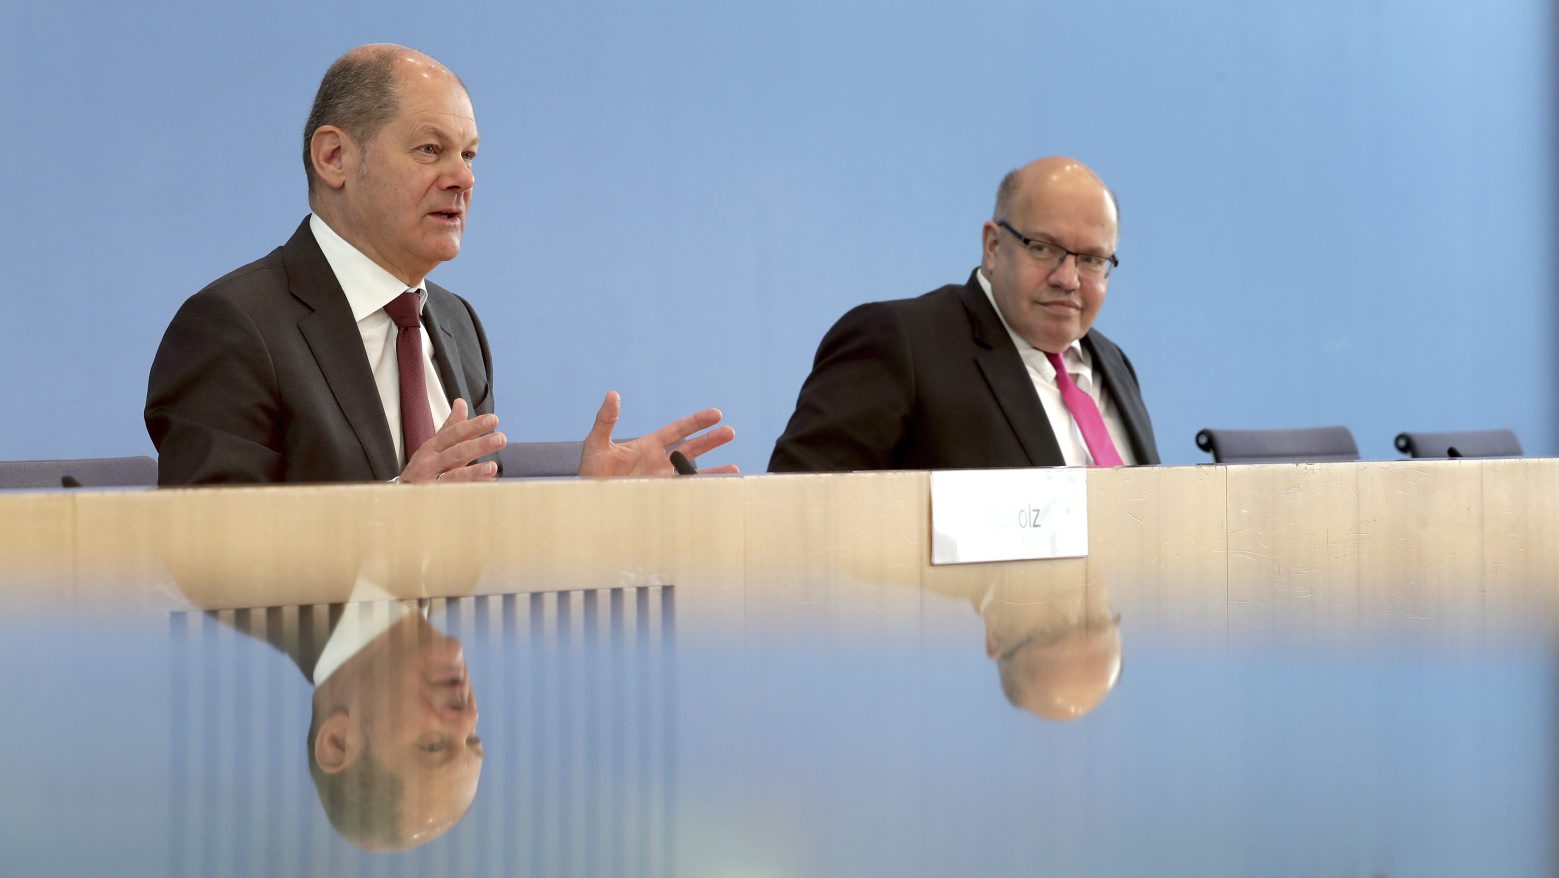 German Finance Minister Olaf Scholz, left, and German Economy Minister, Peter Altmaier, right, address the media in Berlin, Germany, Monday, March 23, 2020 during a press conference on the supplemental budget 2020 and how the ministries will react against the new coronavirus. For most people, the new coronavirus causes only mild or moderate symptoms. For some it can cause more severe illness (AP Photo/Michael Sohn, pool) Virus Outbreak Germany Economy